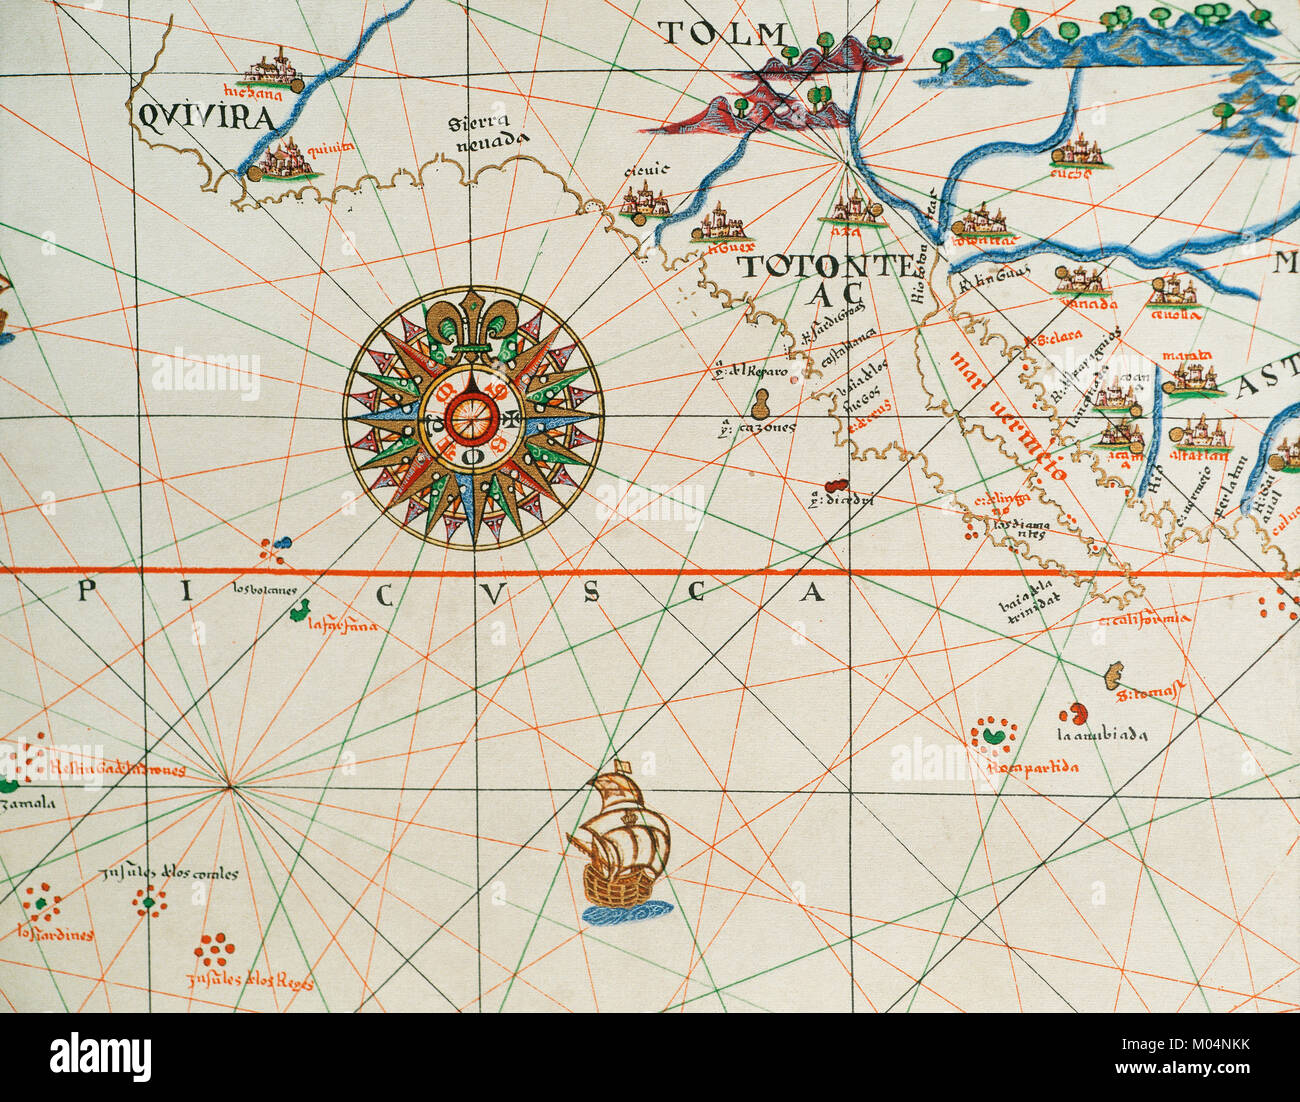 Coast of high and low california and compass rose. Nautical chart. Atlas of Joan Martines, 1587. Dedicated to Philip II. Mallorcan School. Stock Photo